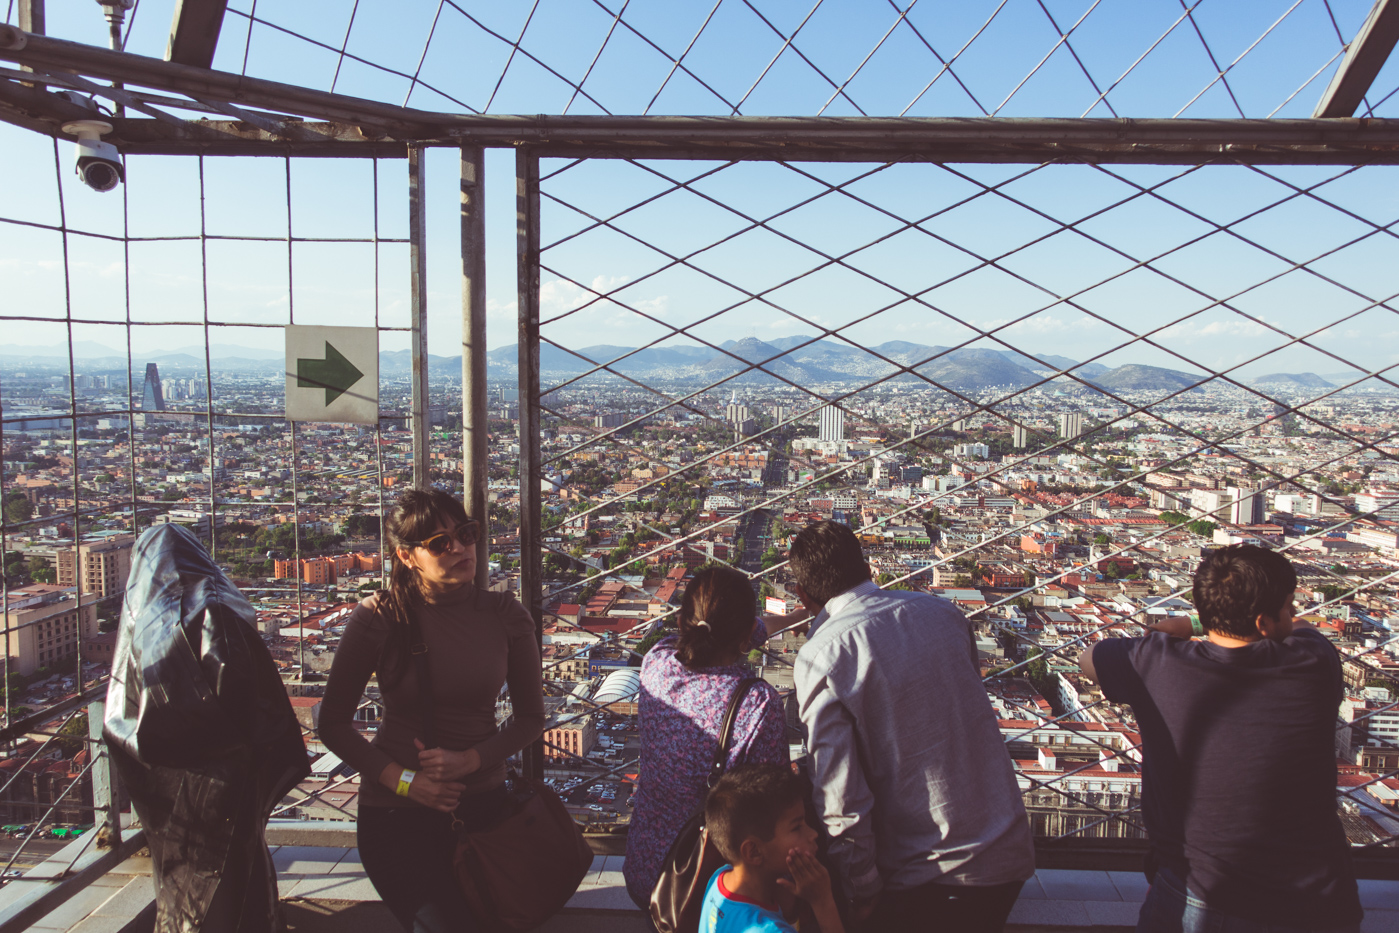 Torre Latinoamericana: Views from the fifth tallest tower in Mexico City